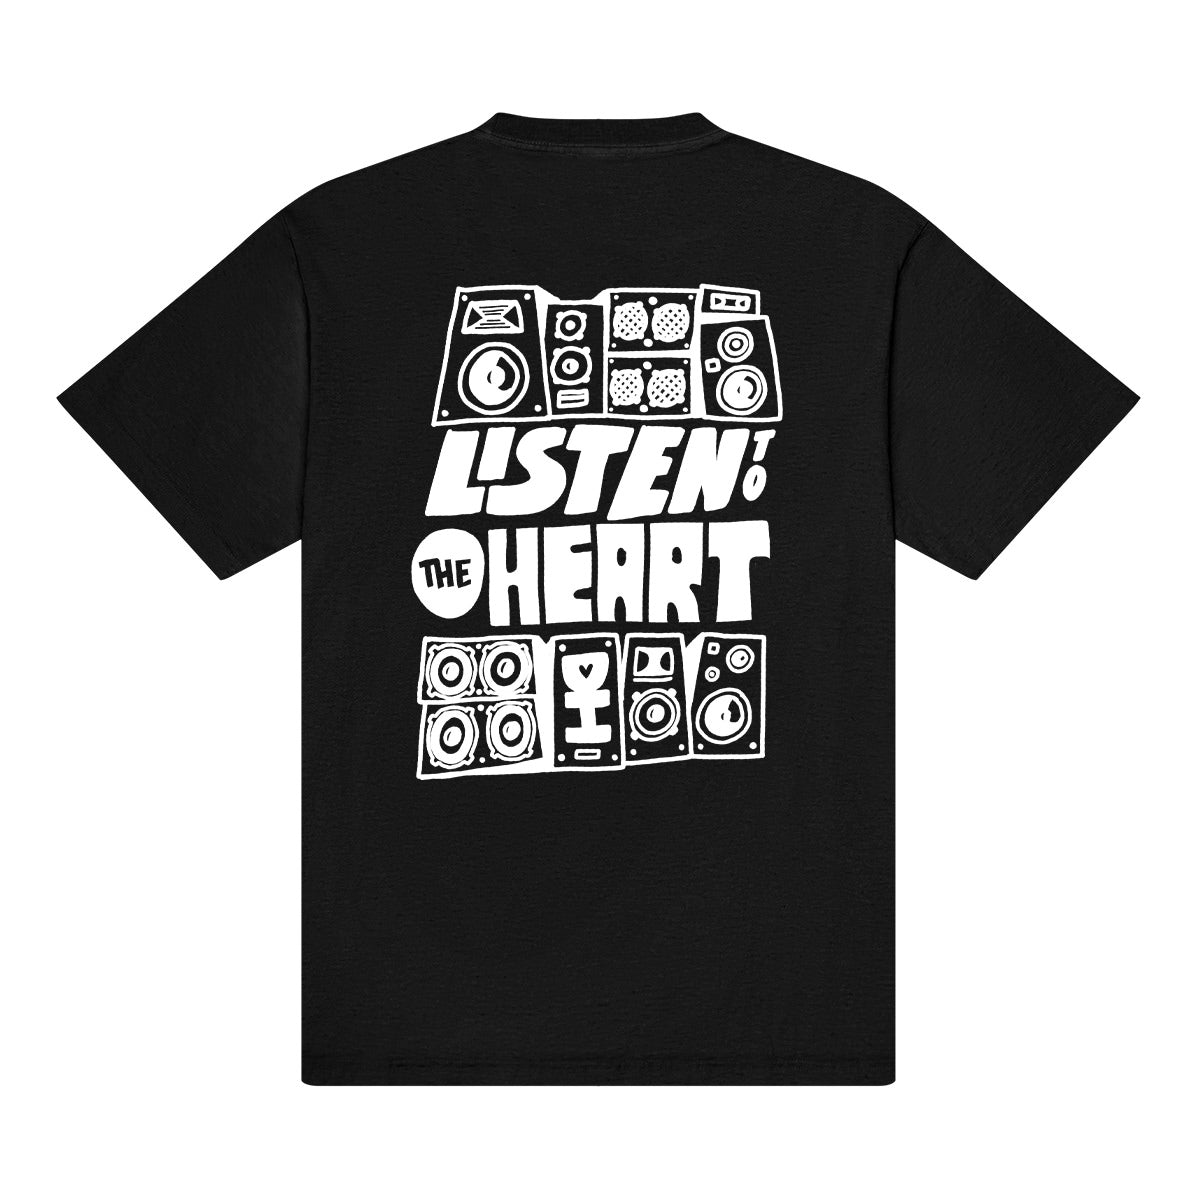 Listen to Your Heart Tee